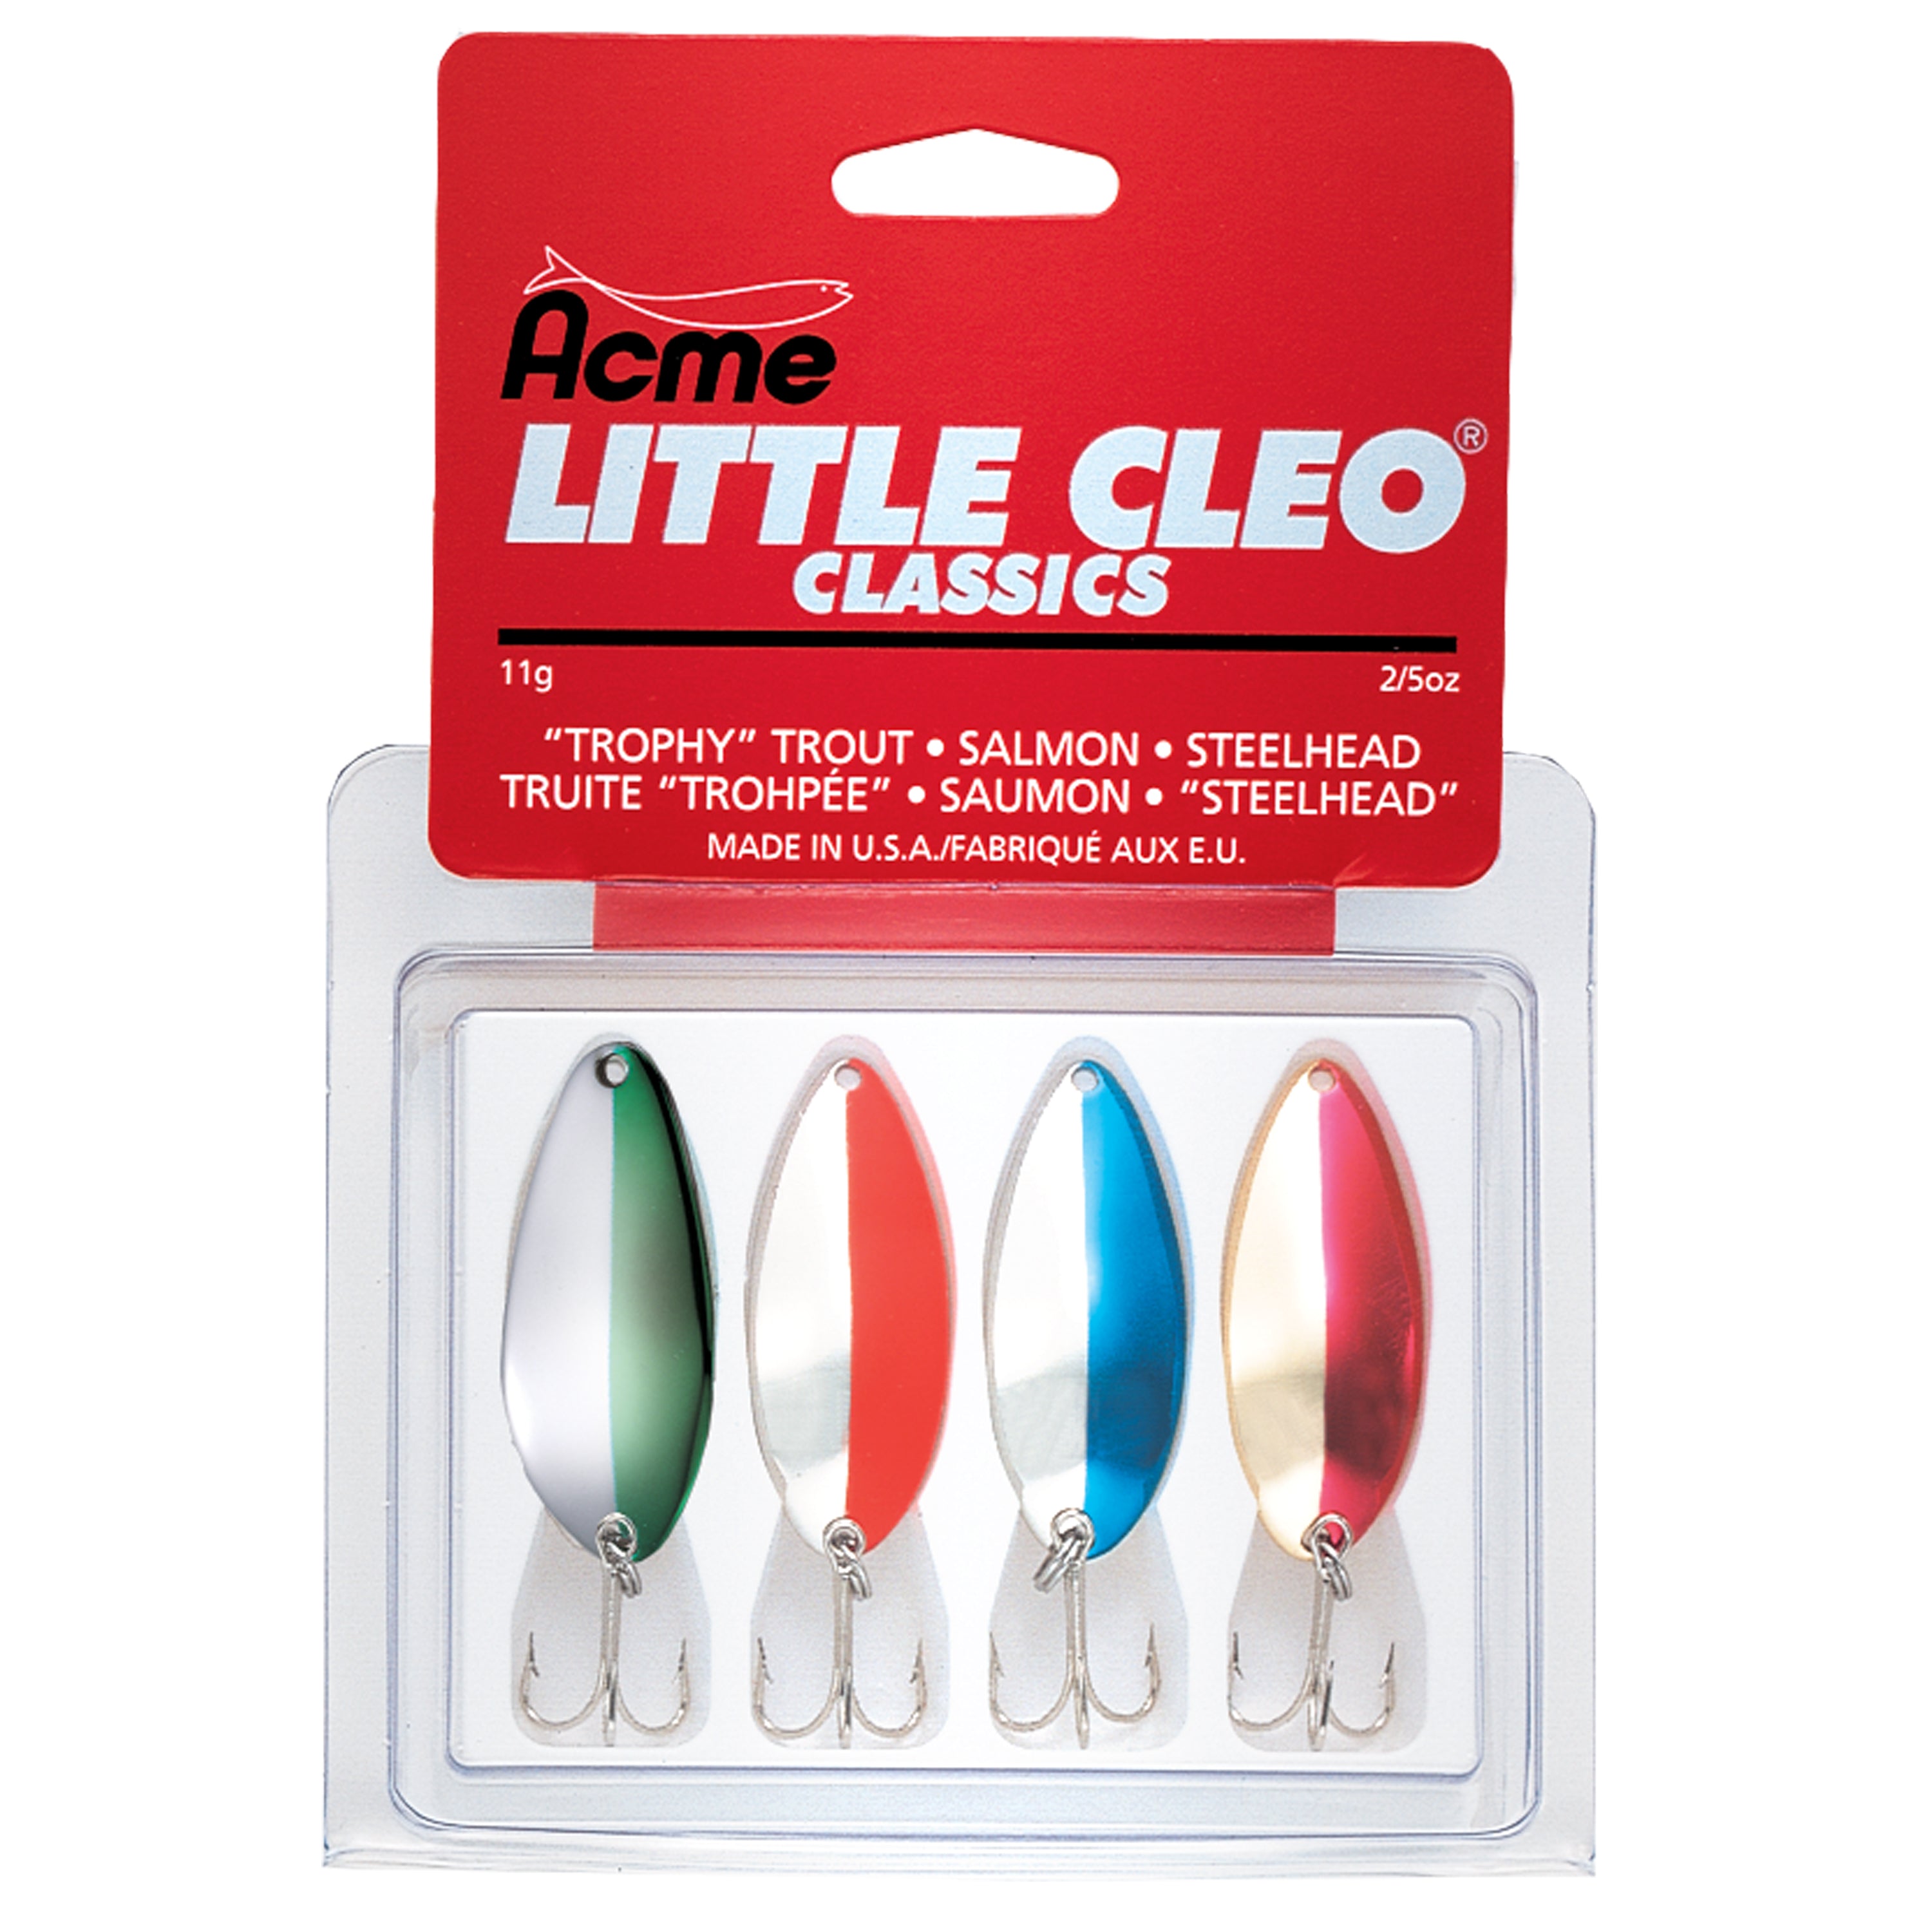 Vintage Little Cleo Fishing Lure Set in Package 